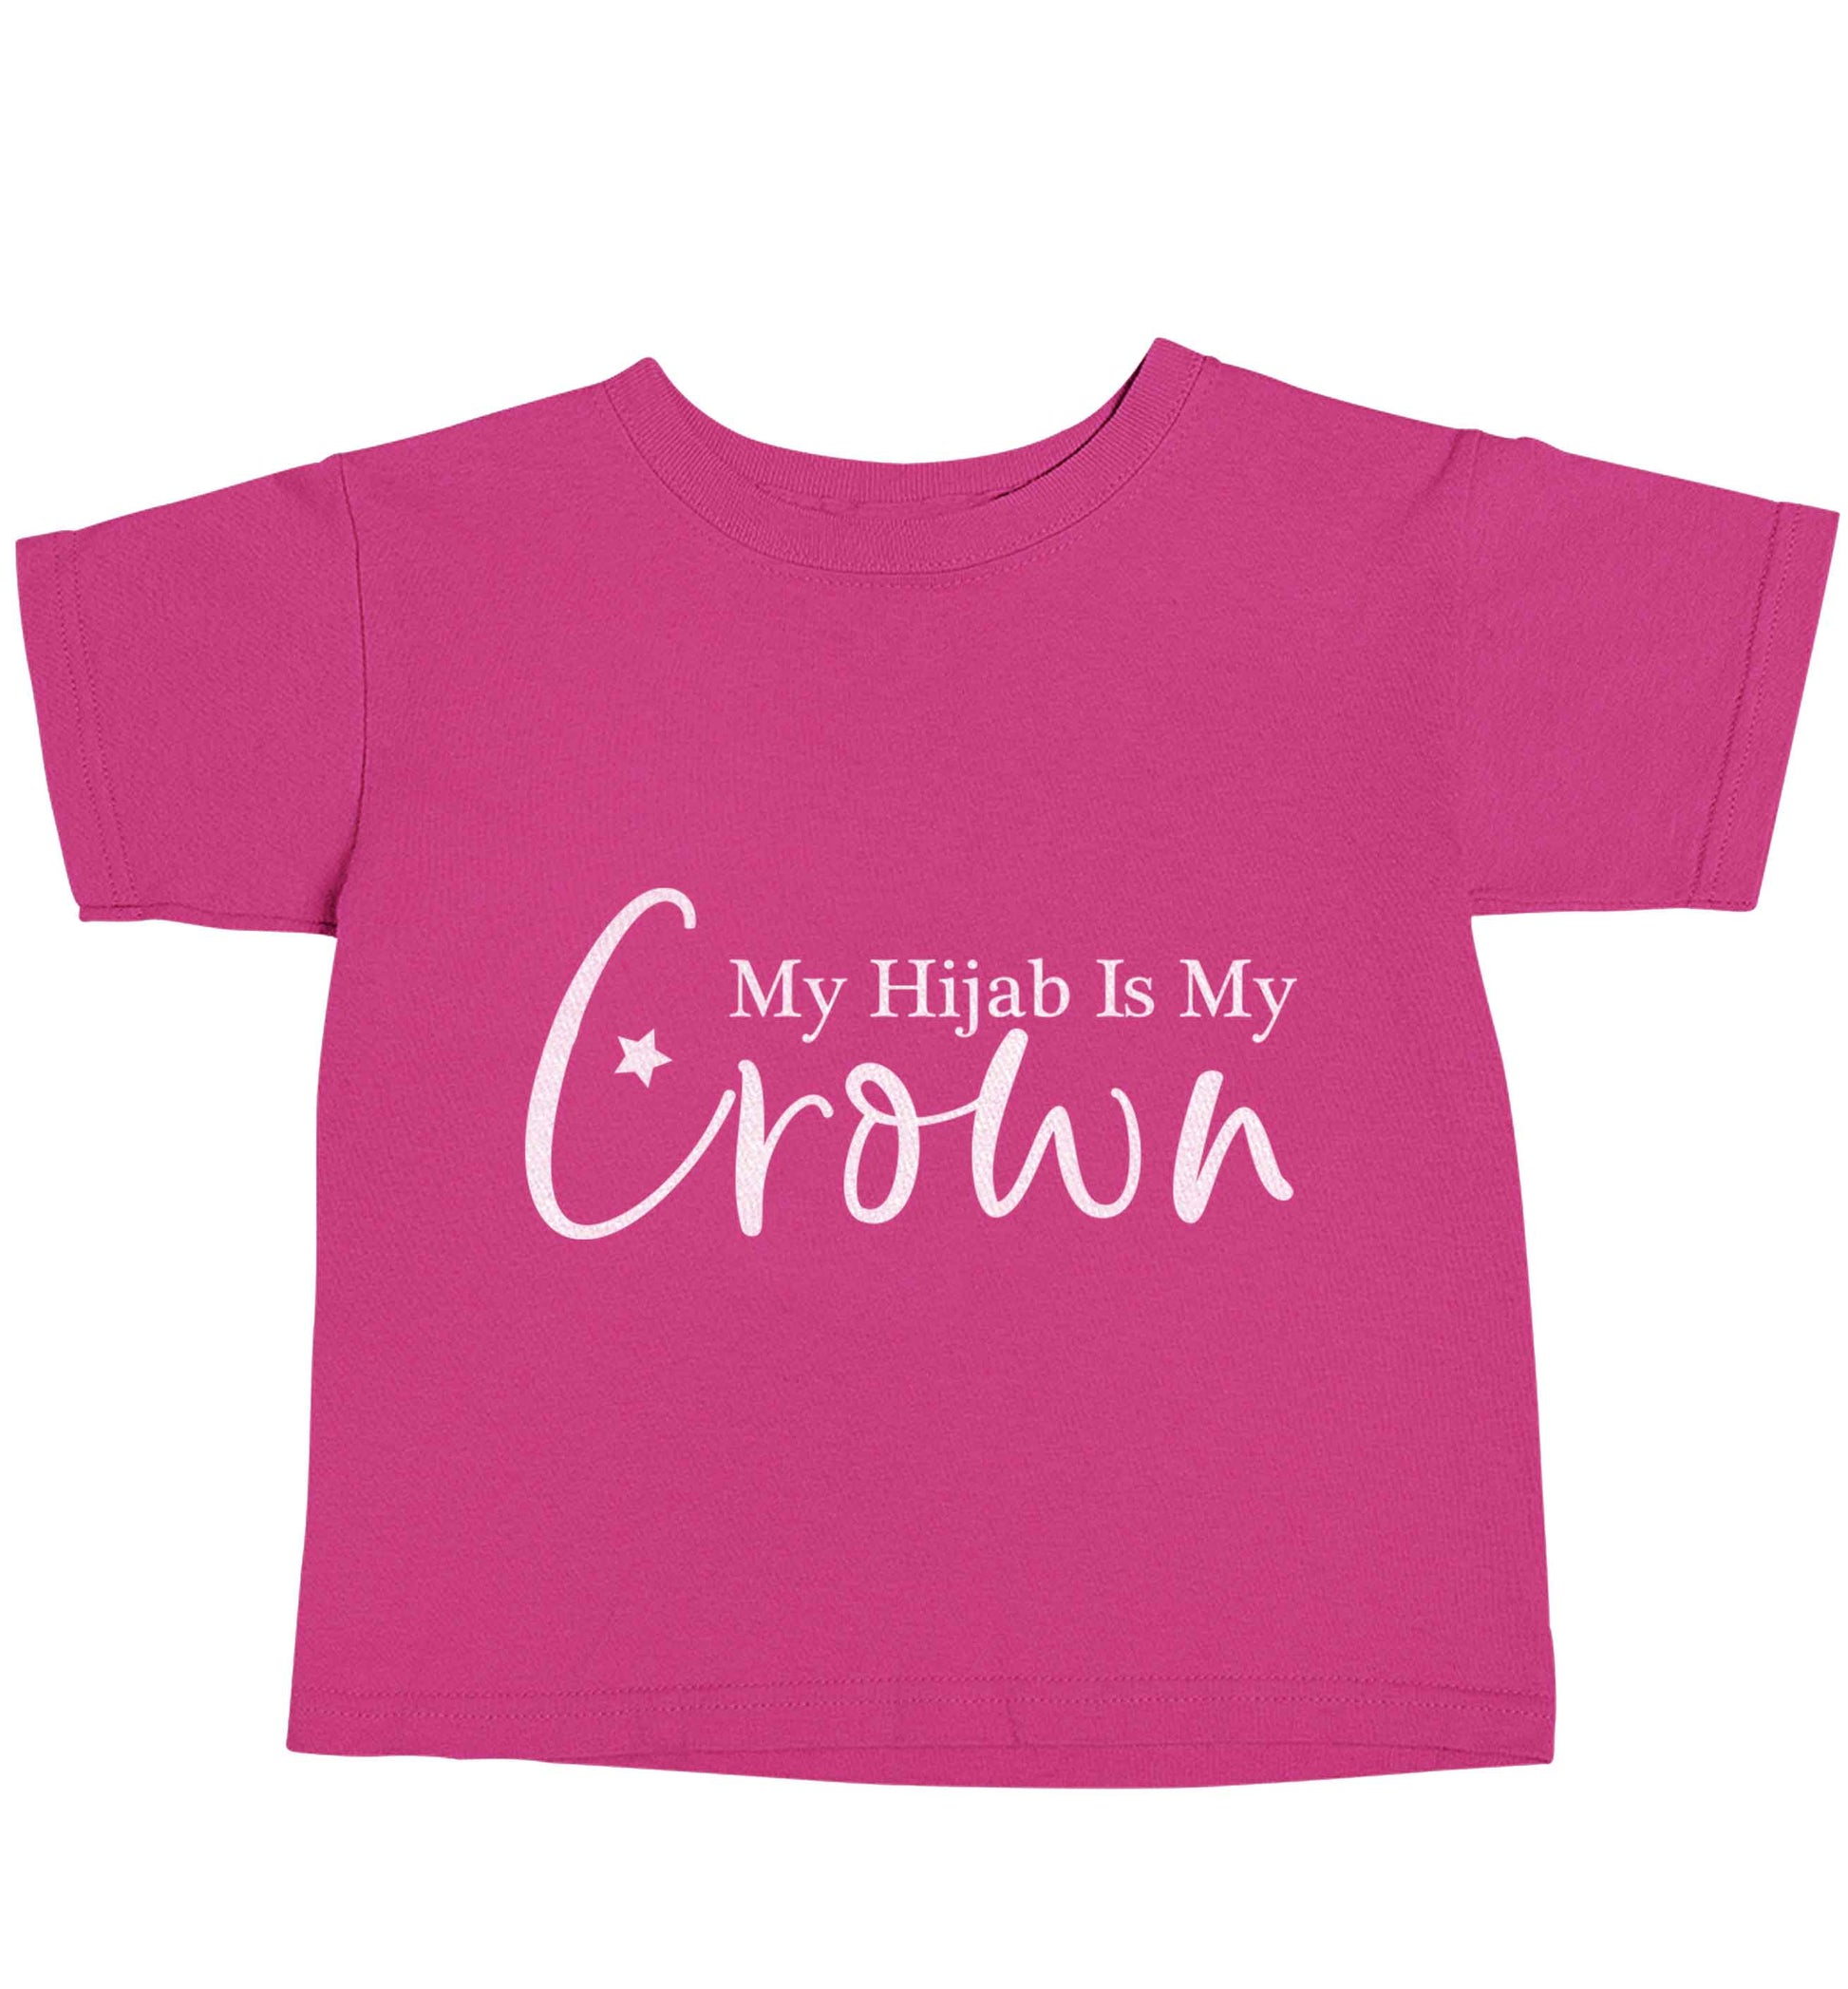 My hijab is my crown pink baby toddler Tshirt 2 Years